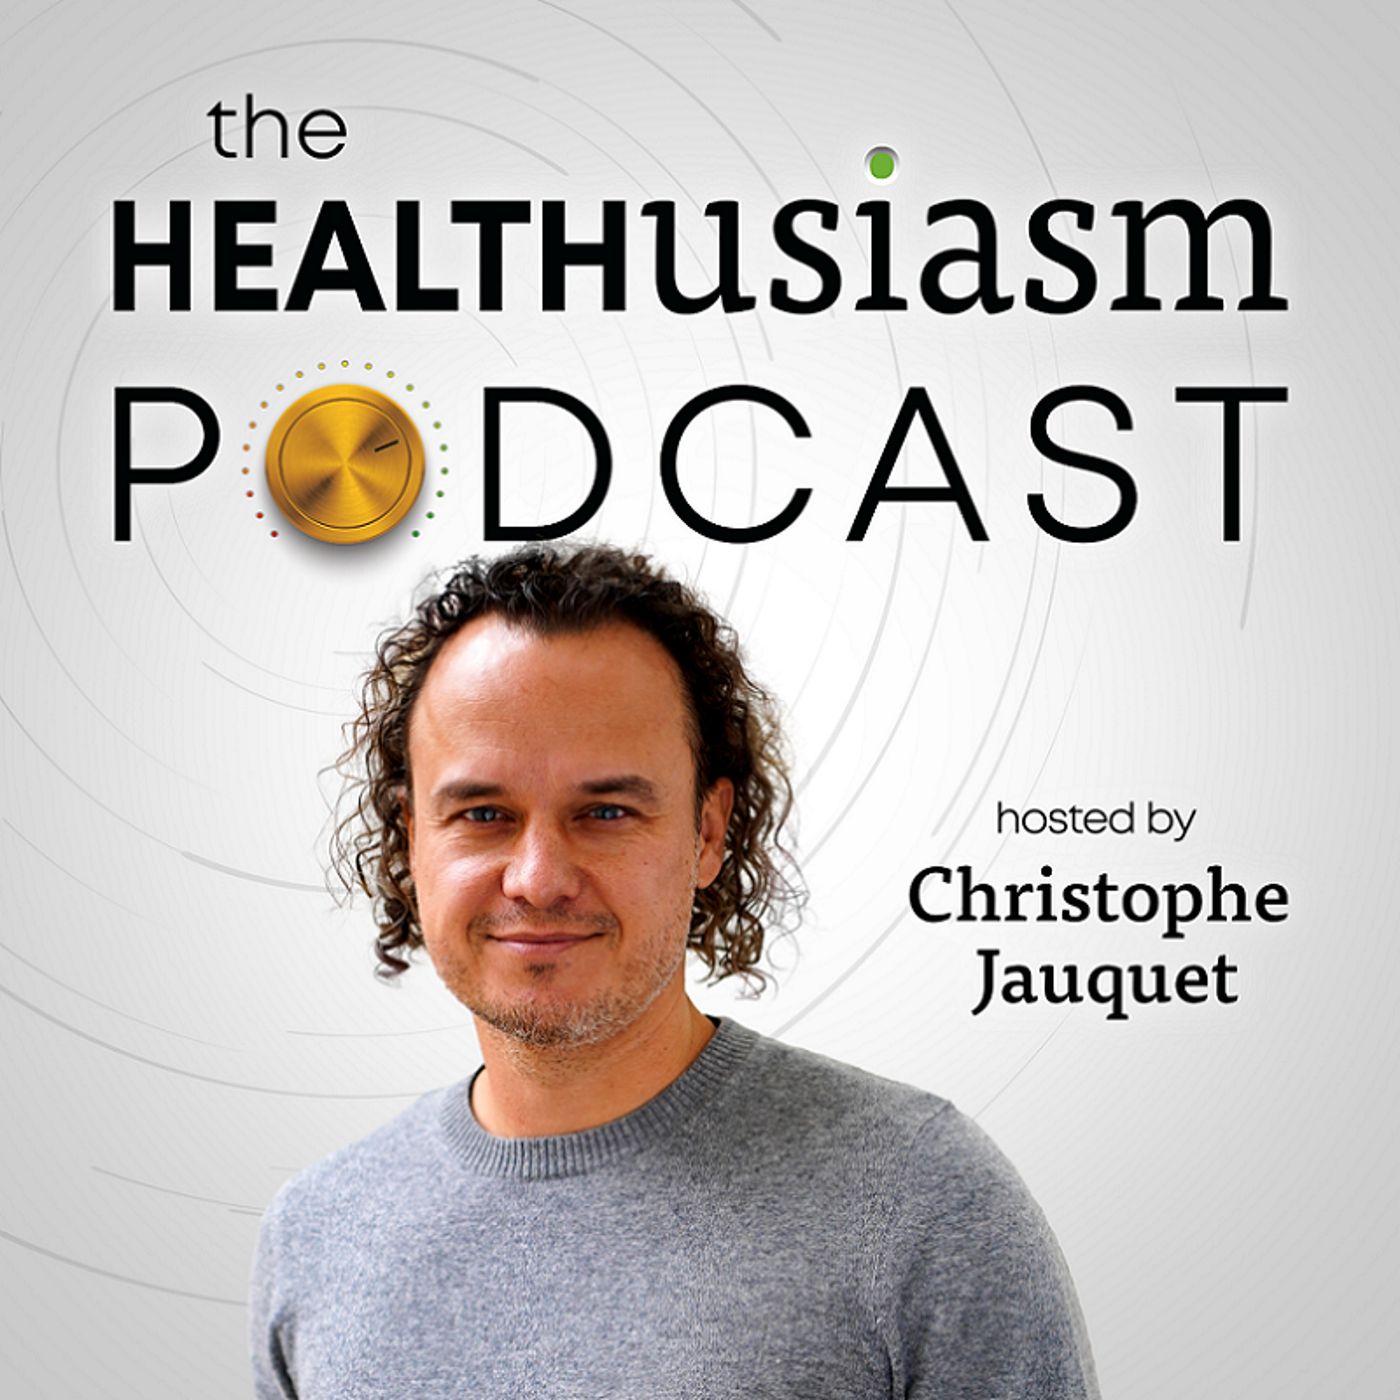 The Healthusiasm Podcast: Healthy Cities & Humanoids for Health